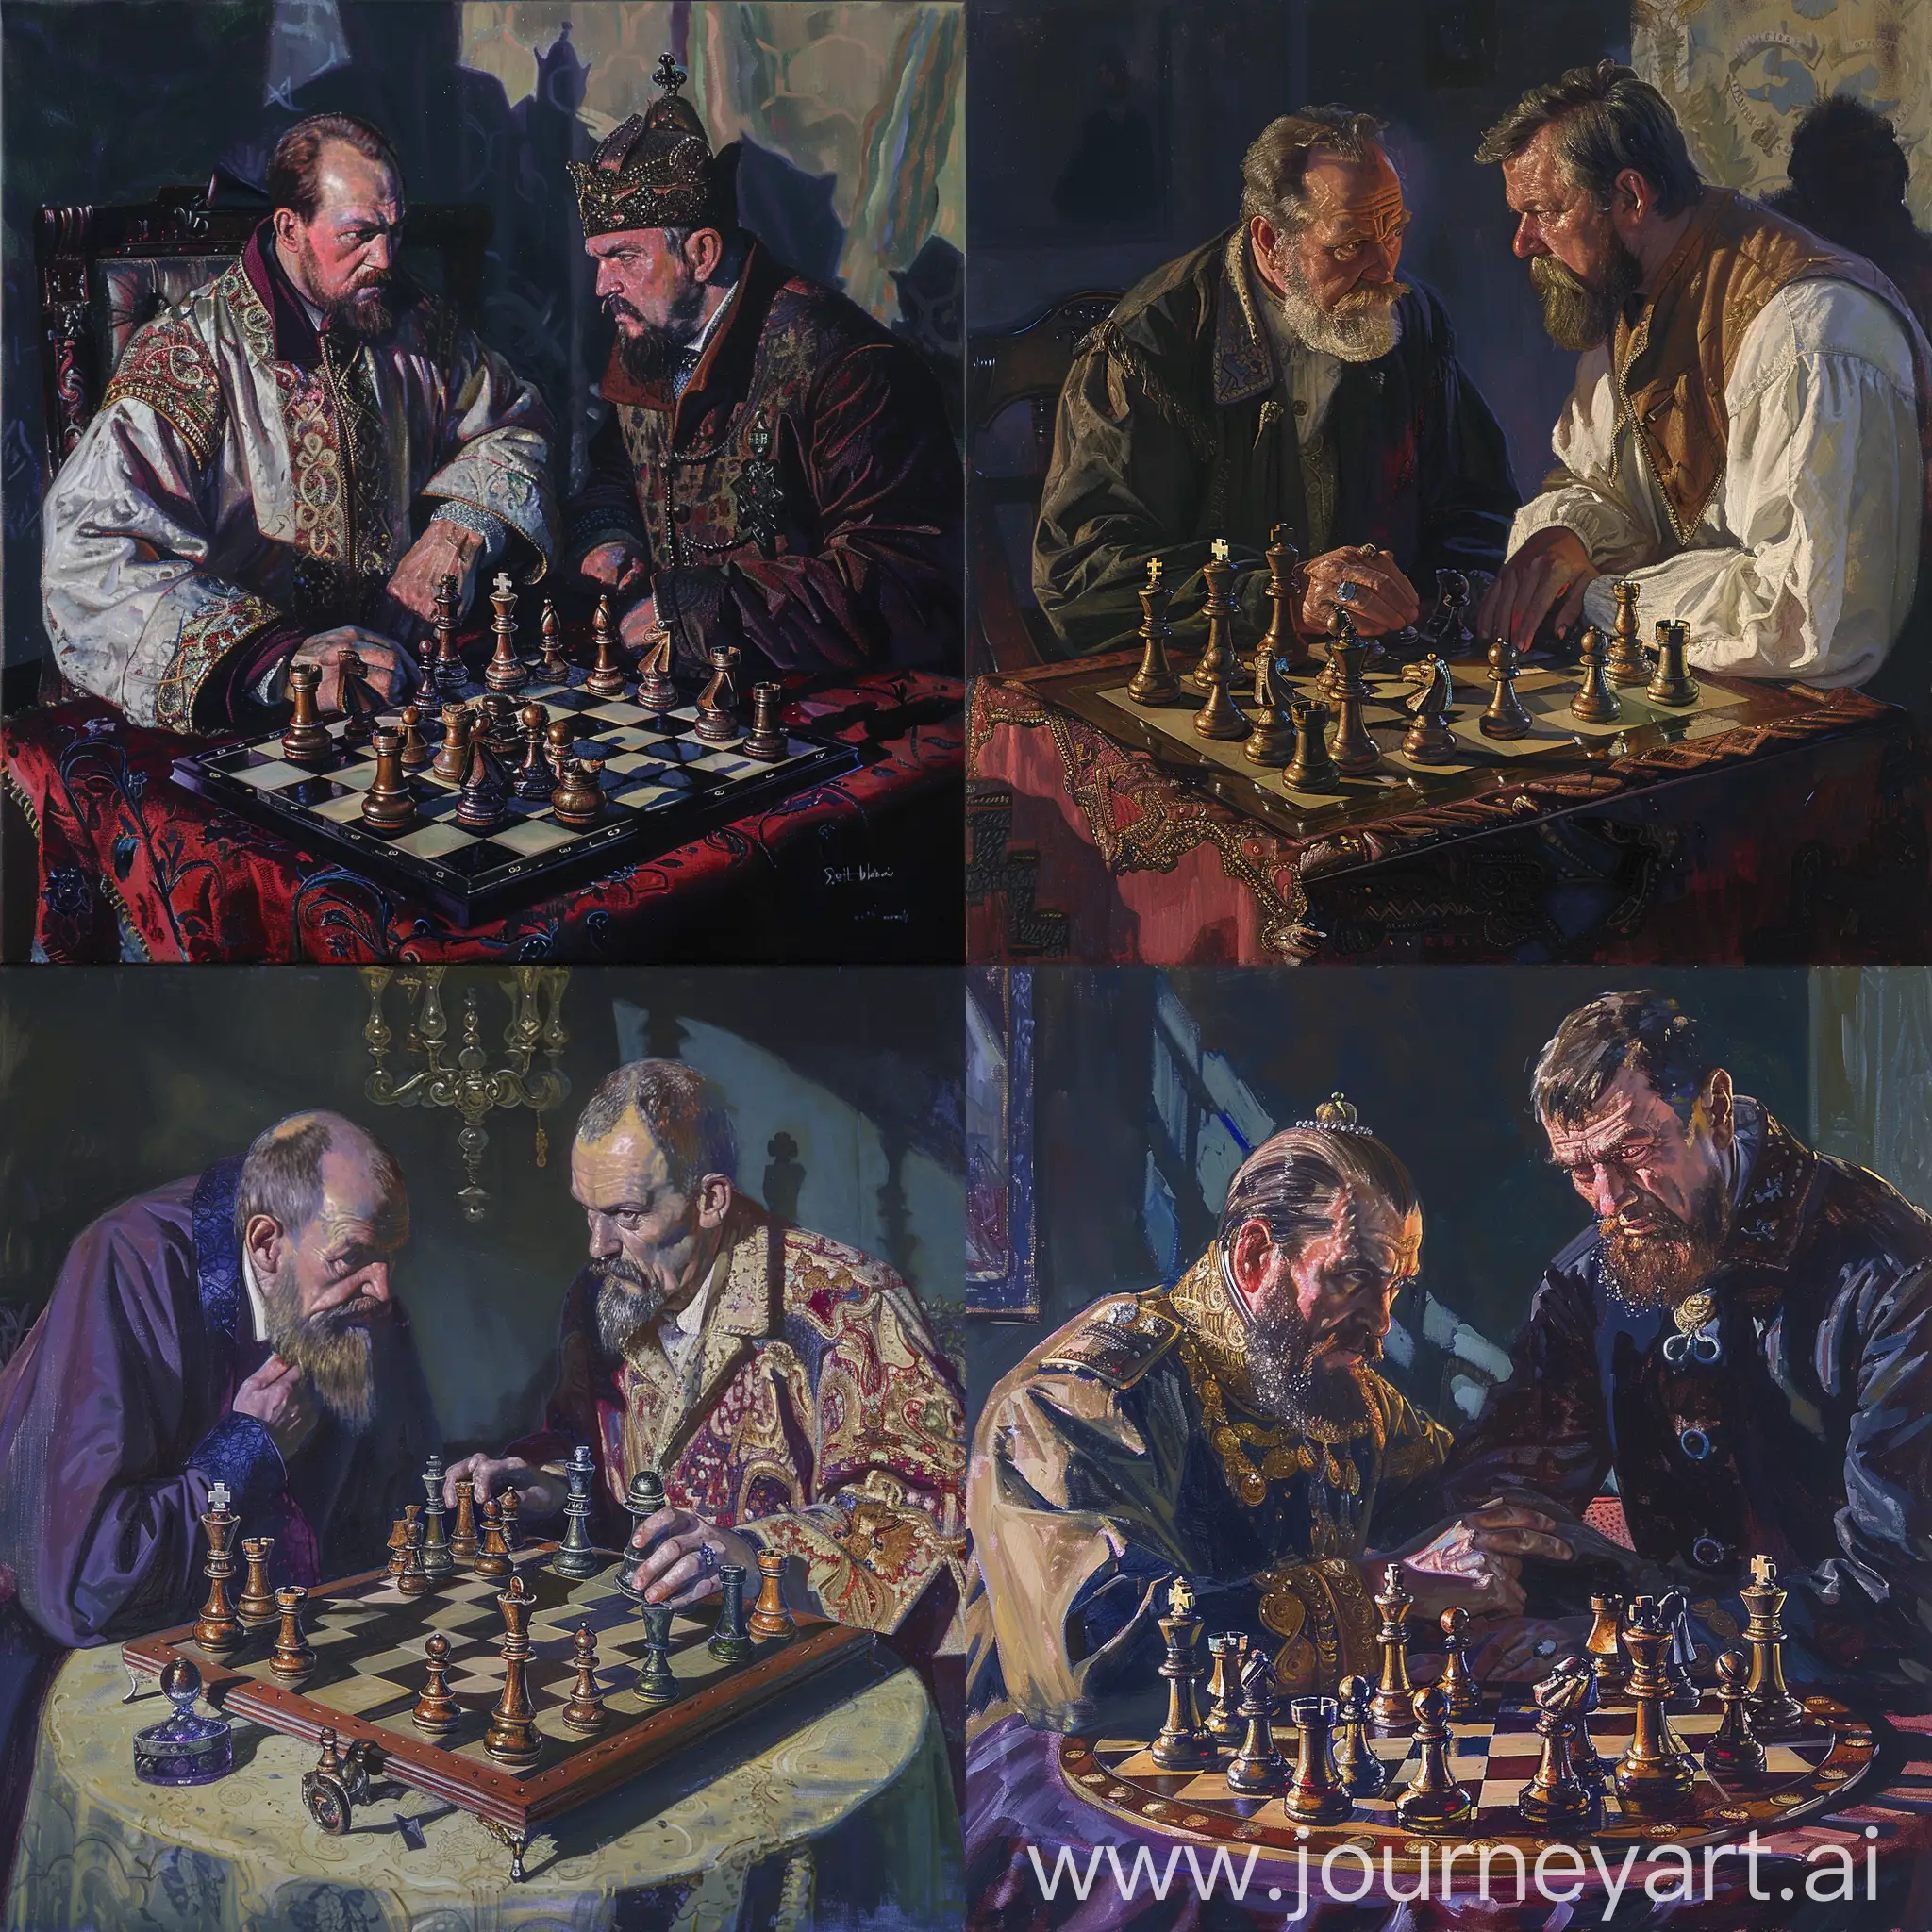 An oil painting portraying Ivan the Terrible and Bogdan Belsky engaged in a tense game of chess, each with a steely gaze and strategic minds at work. The setting could be a dimly lit chamber in the Kremlin, with intricate chess pieces placed on an ornate board between them, while shadows dance ominously in the background, hinting at the high stakes of the game and the political intrigue of their time.